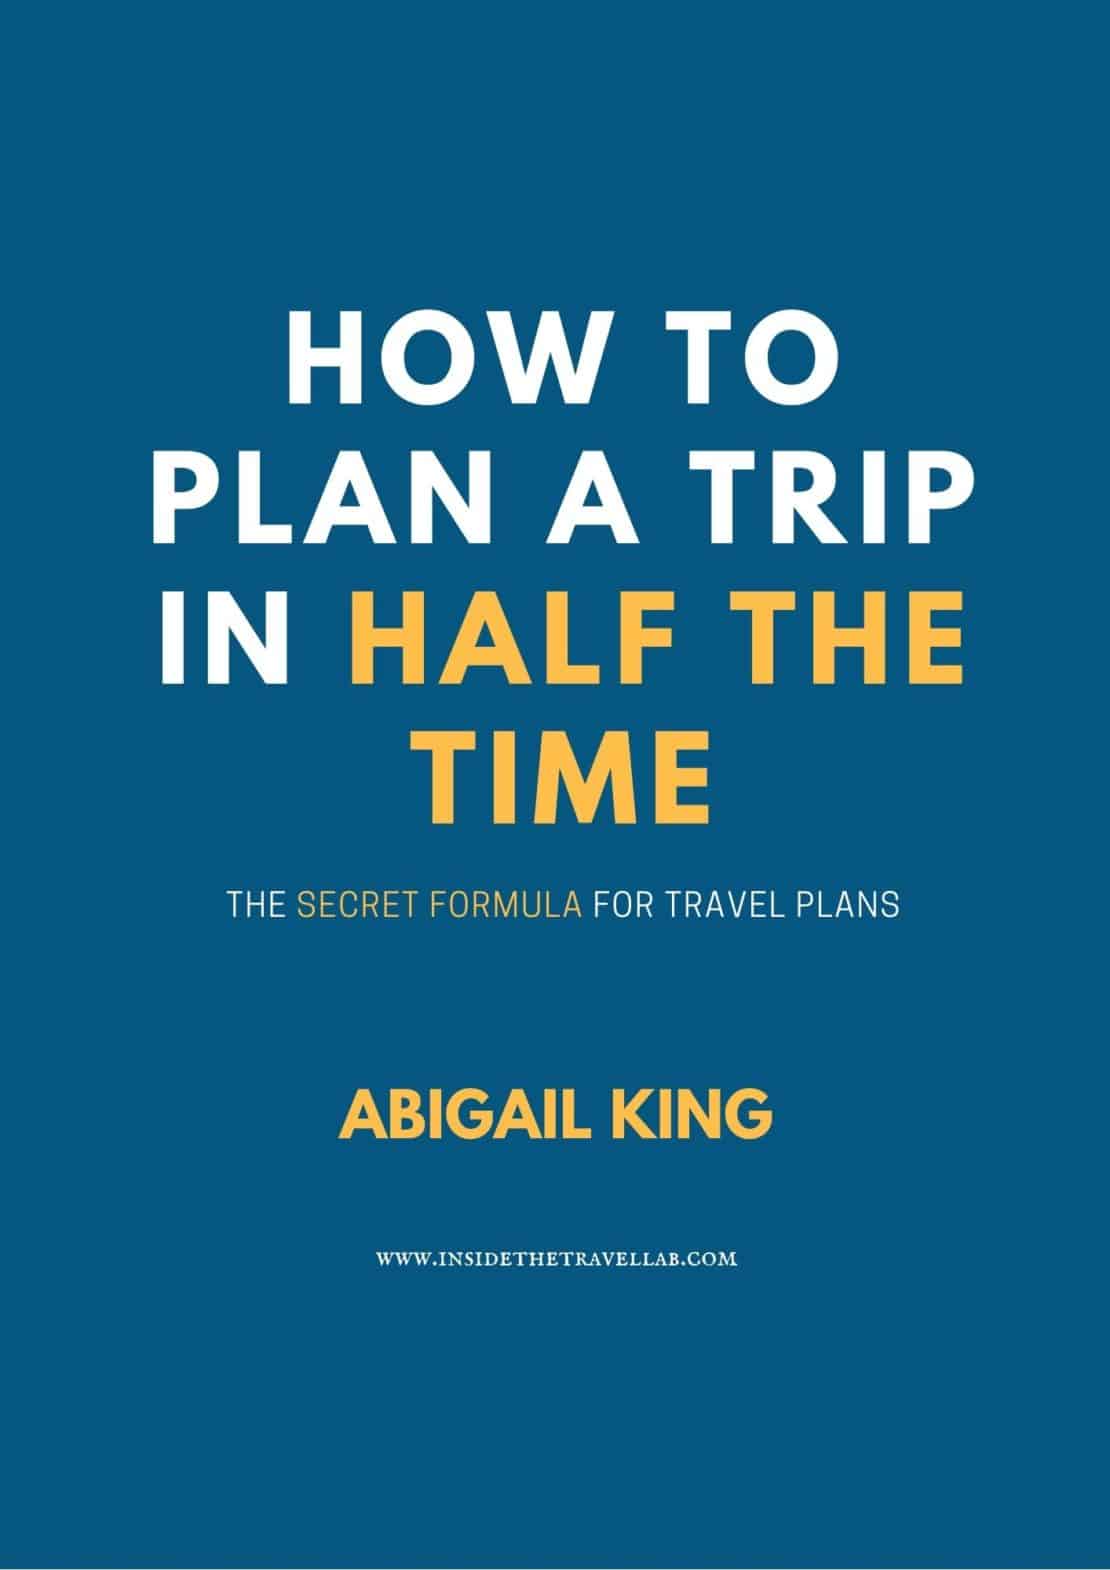 How to plan a trip in half the time